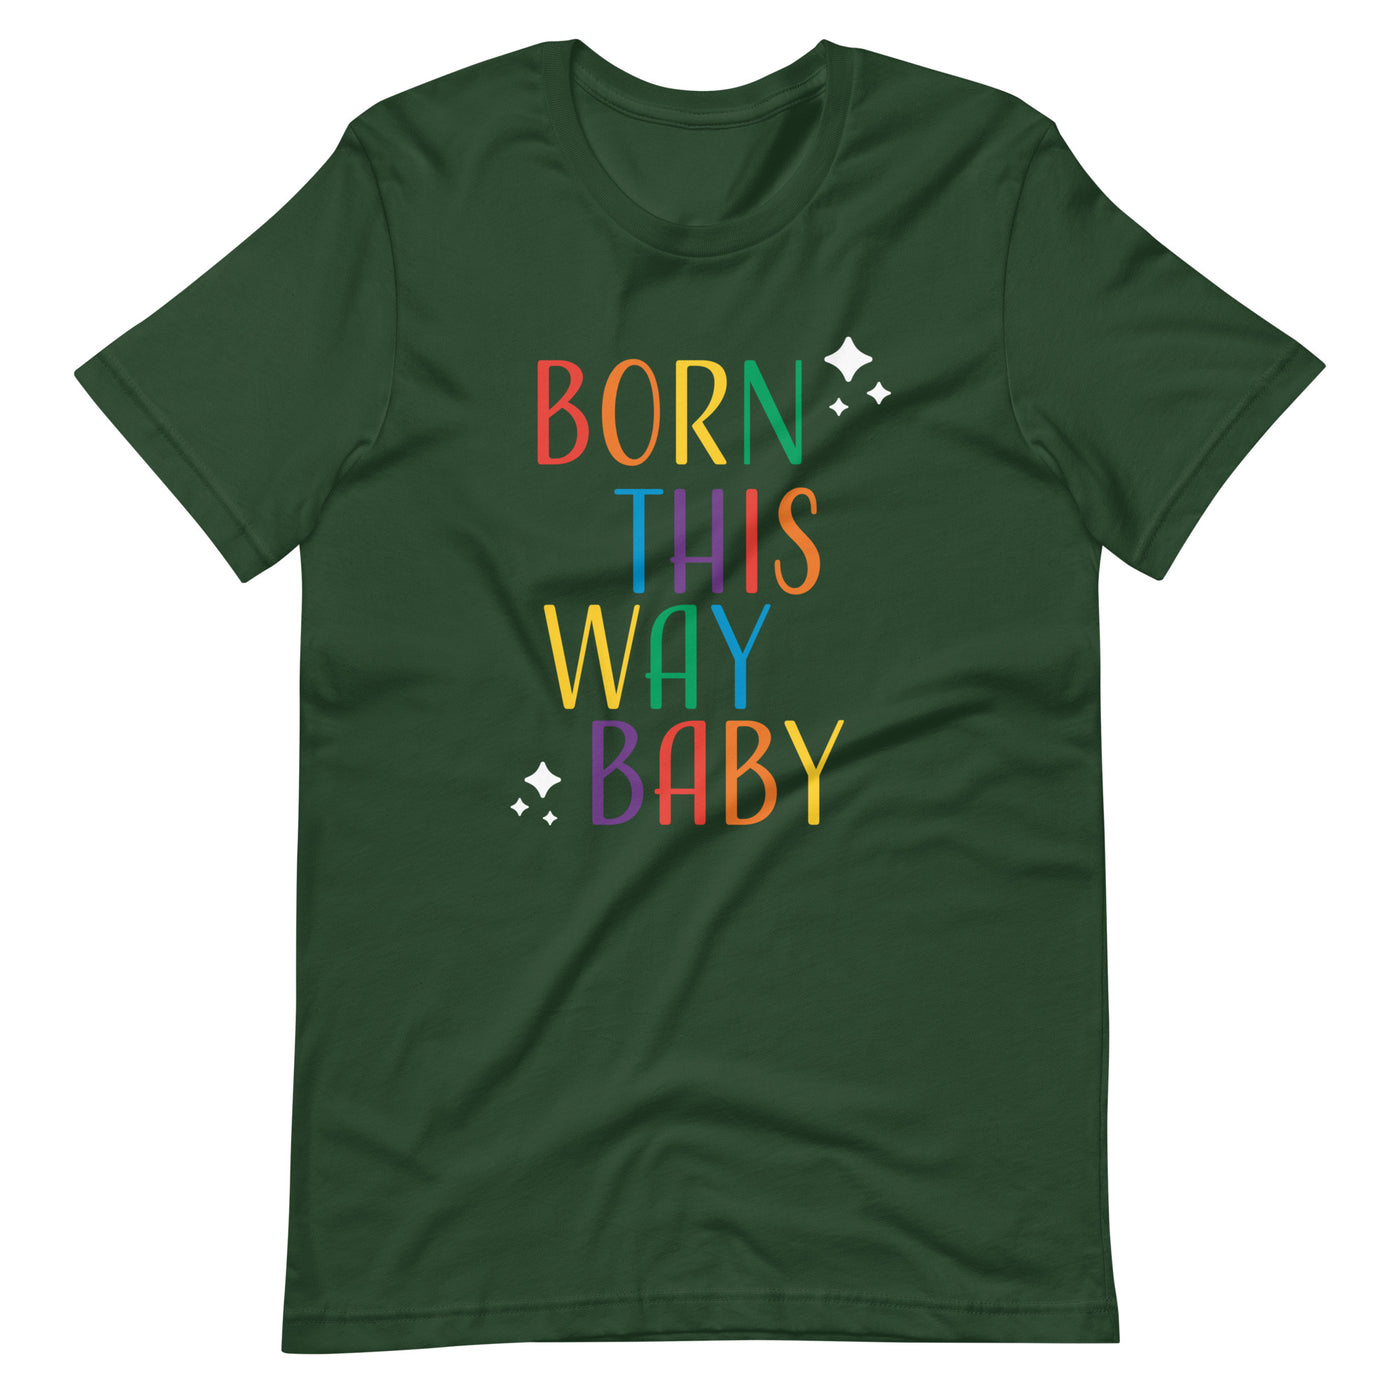 You Were Born a Superstar Born This Way, Baby T-Shirt